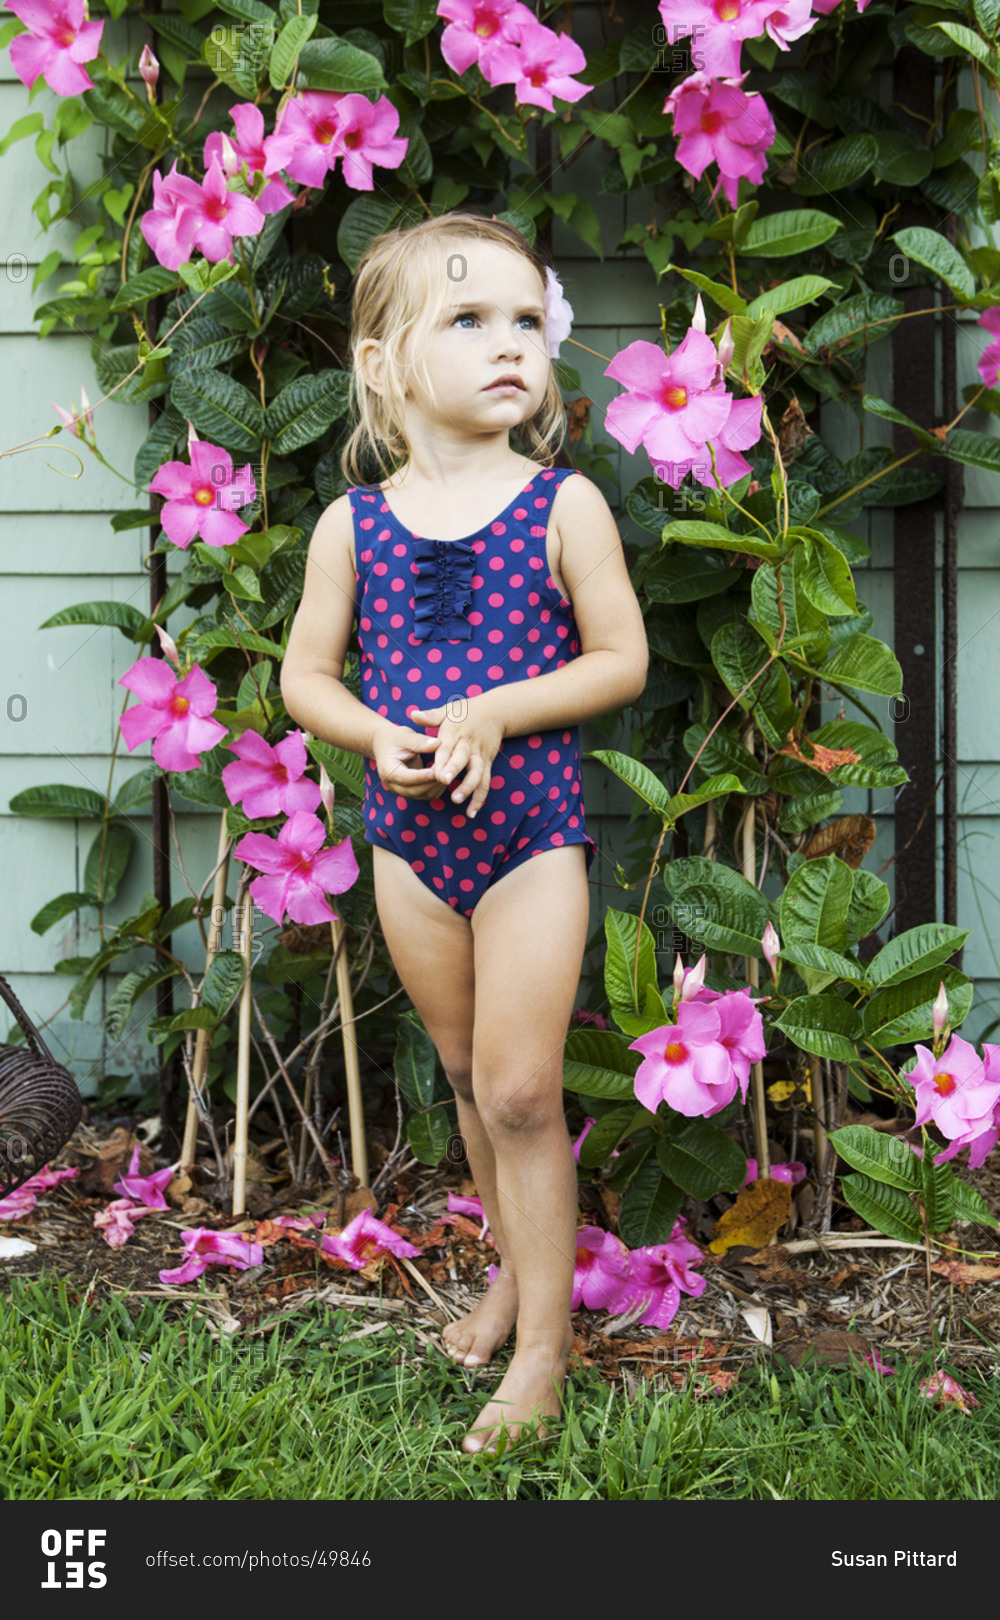 Cute blonde little girl posing in front of pink flowers.